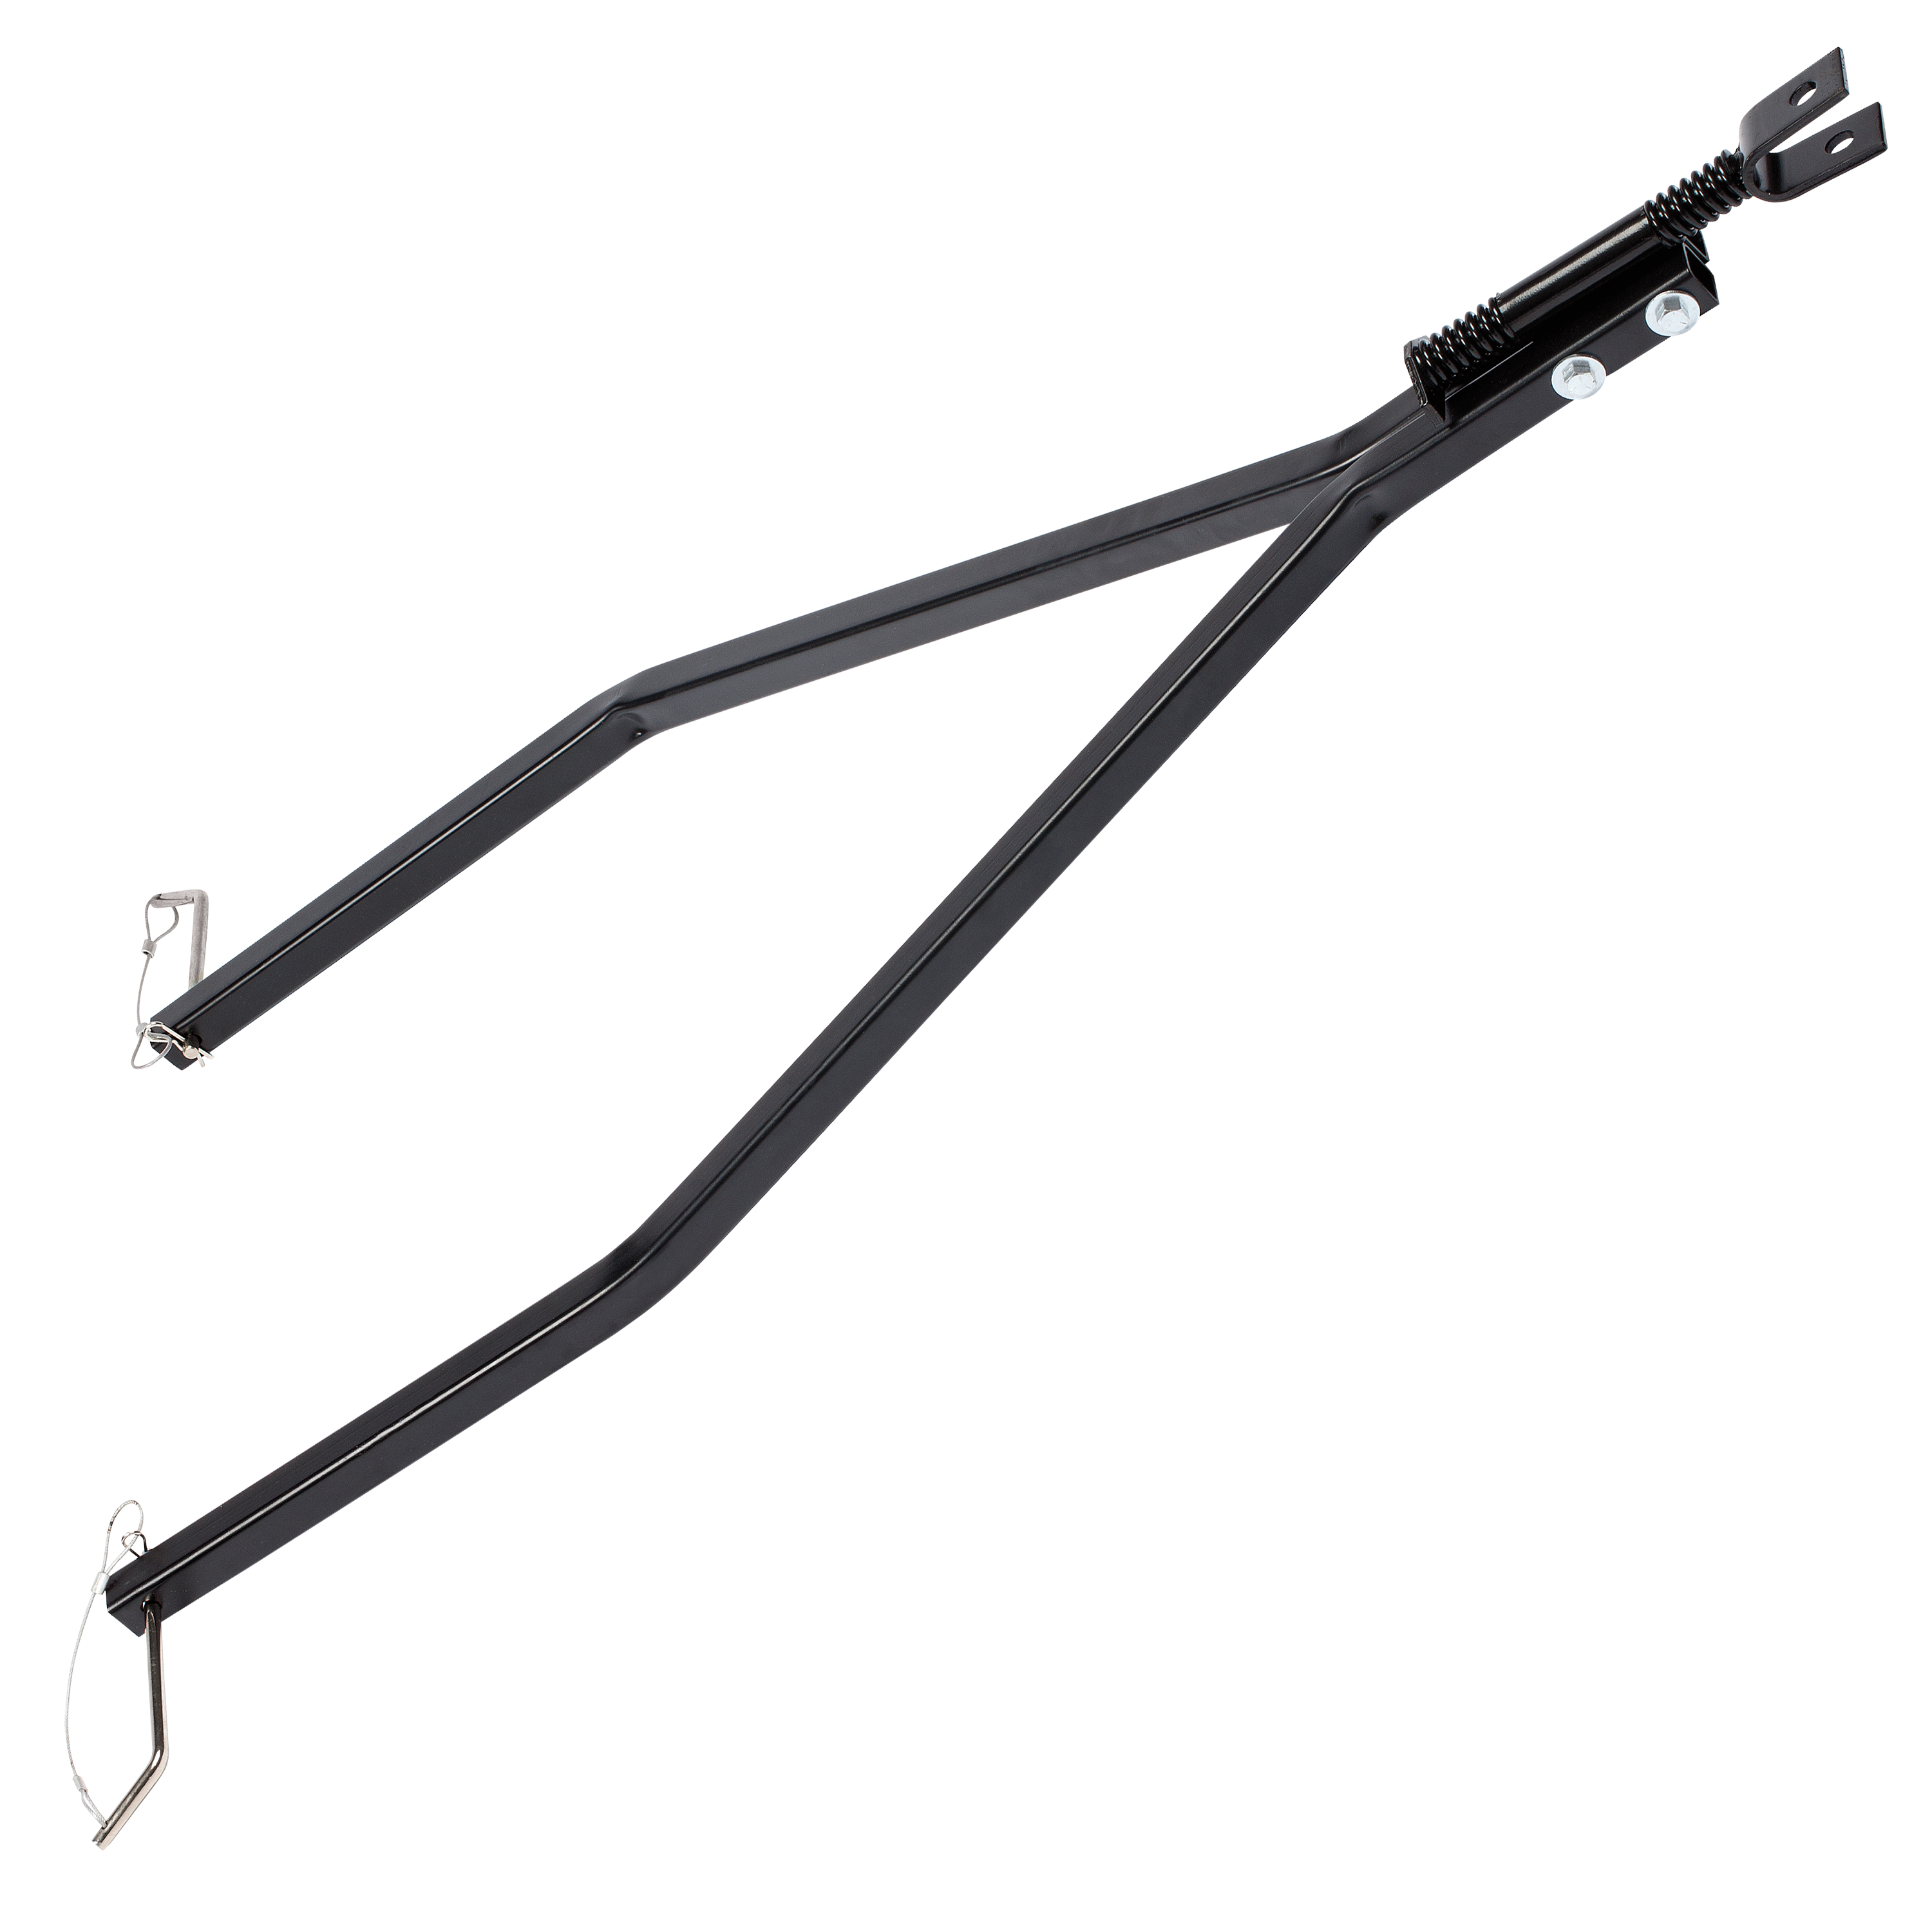 Otter Outdoors Large Sled Tow Hitch